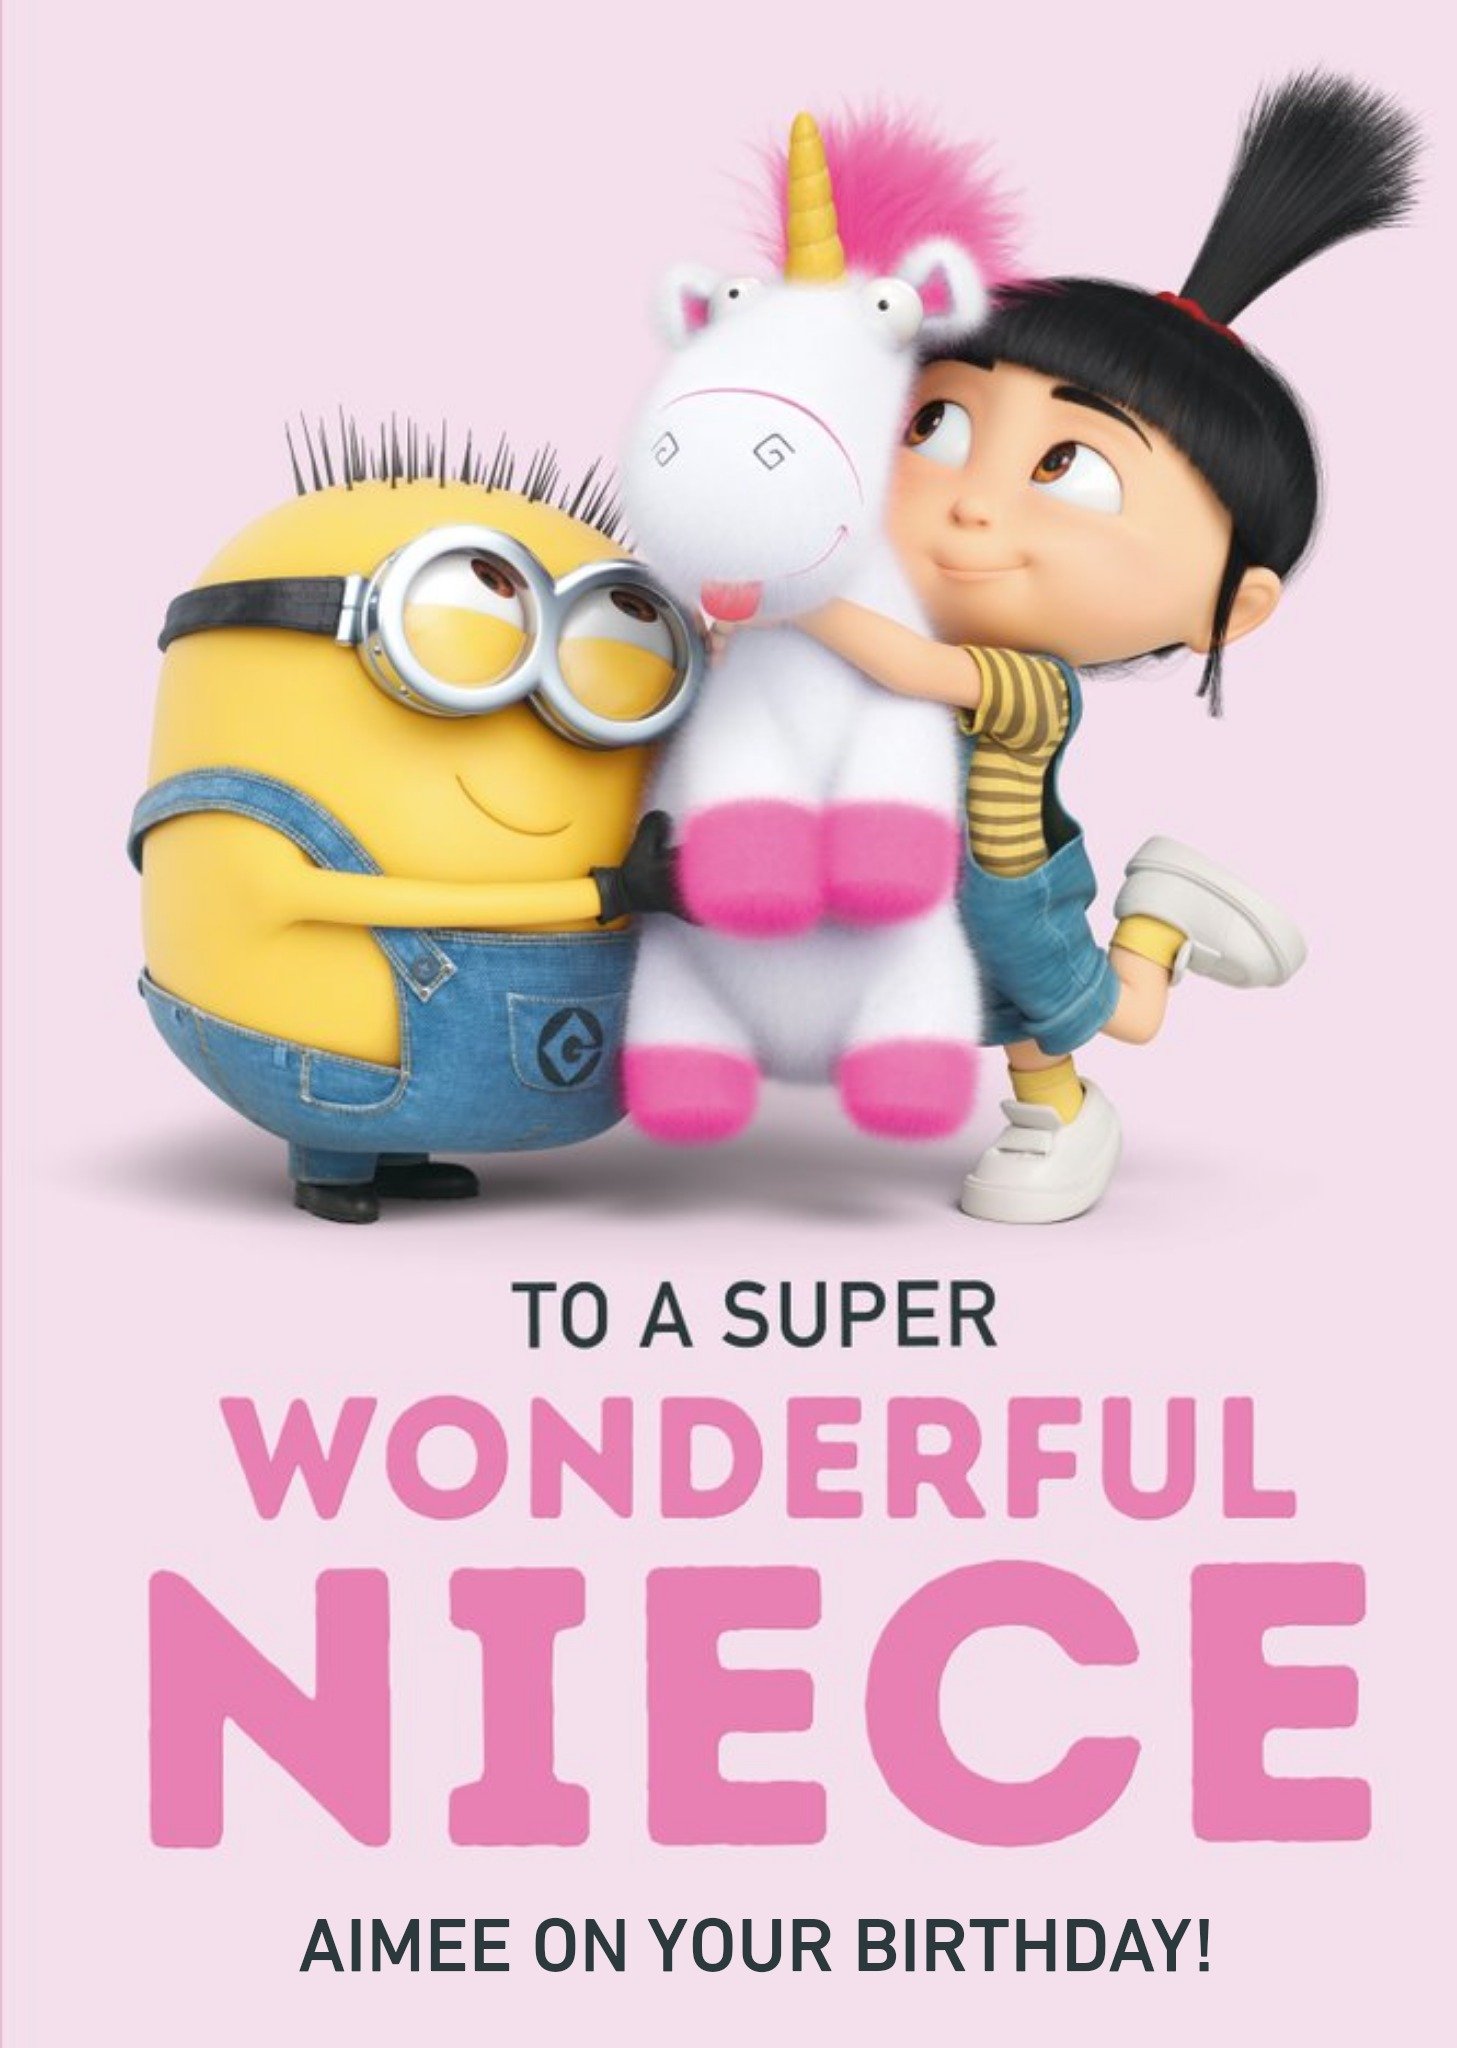 Despicable Me Minions Wonderful Niece Birthday Card, Large